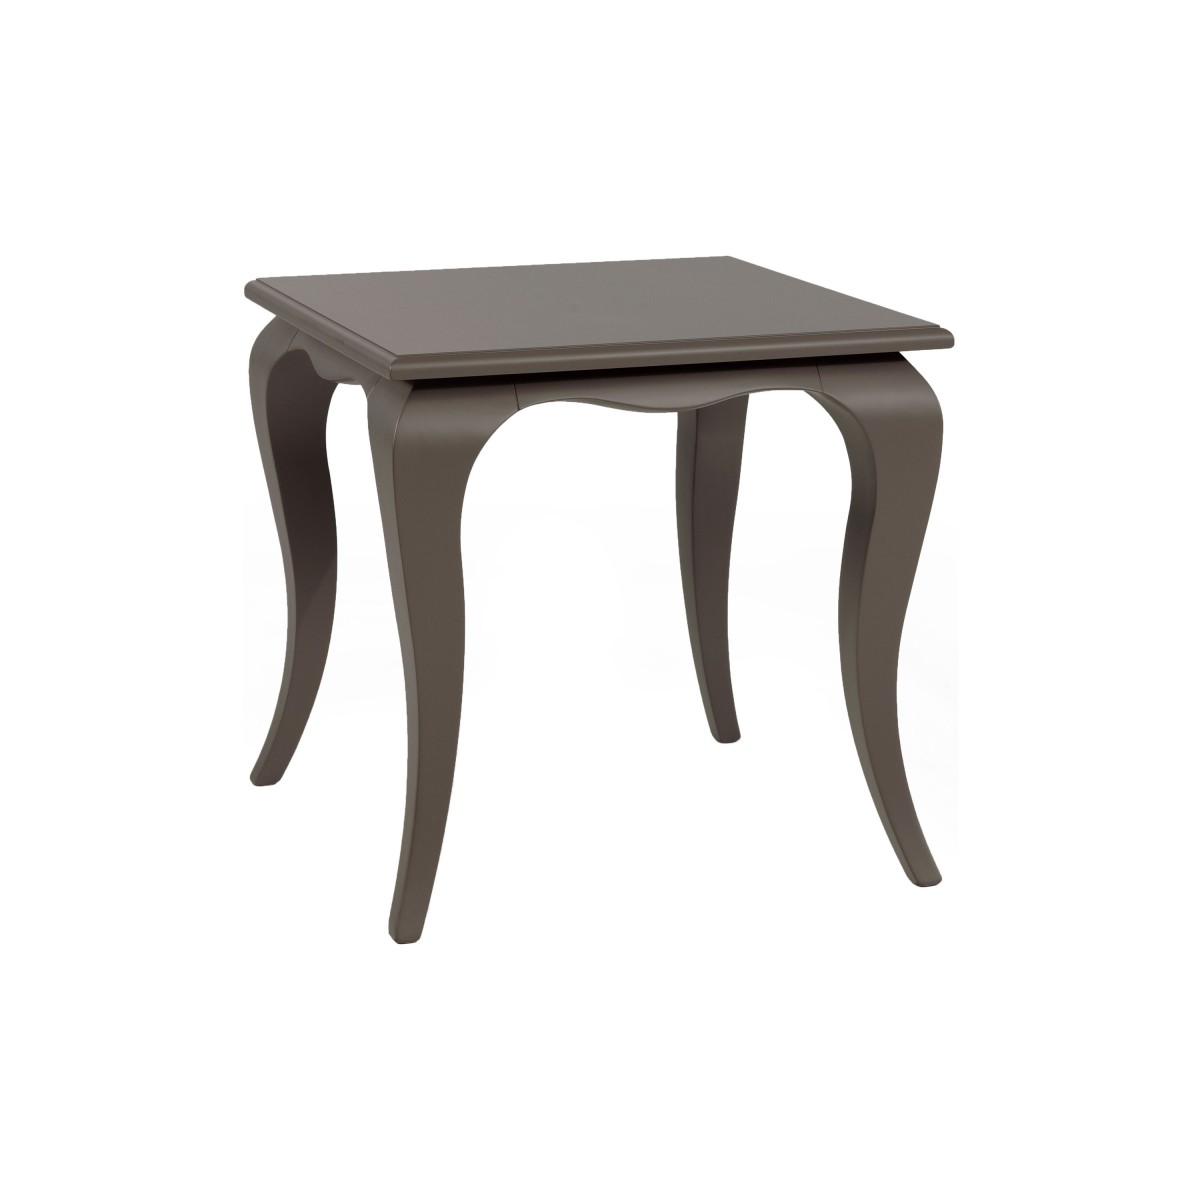 classic style small rectangular wooden table